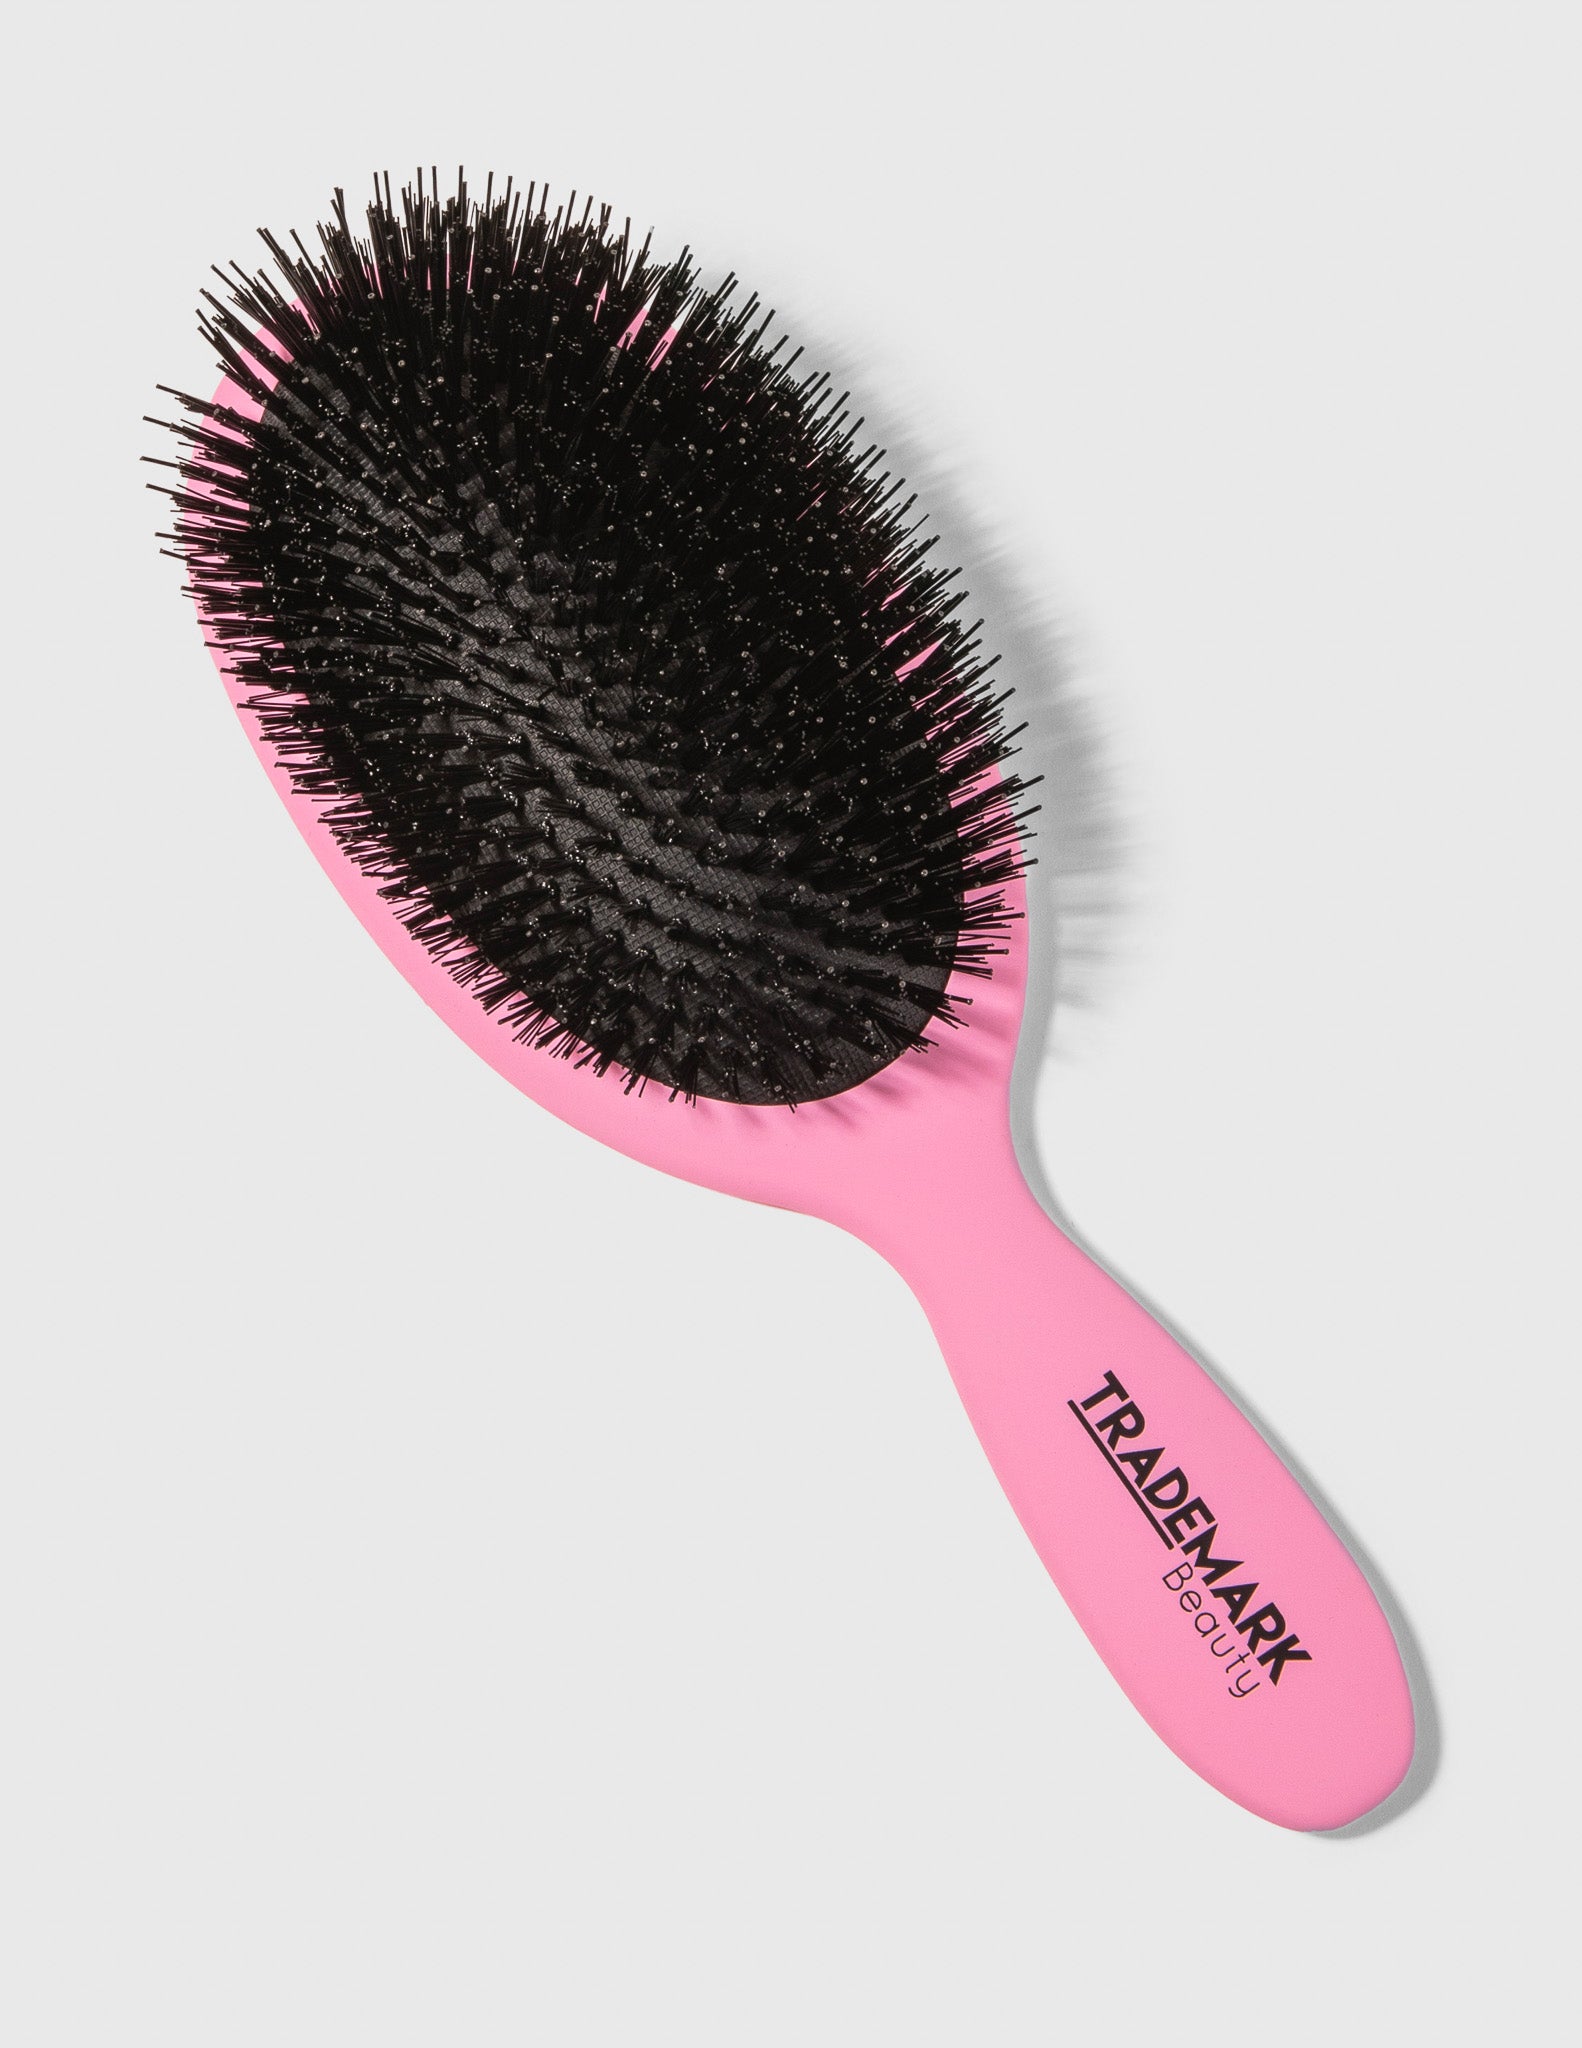 Tame Your Mane Smoothing Brush - Trademark Beauty